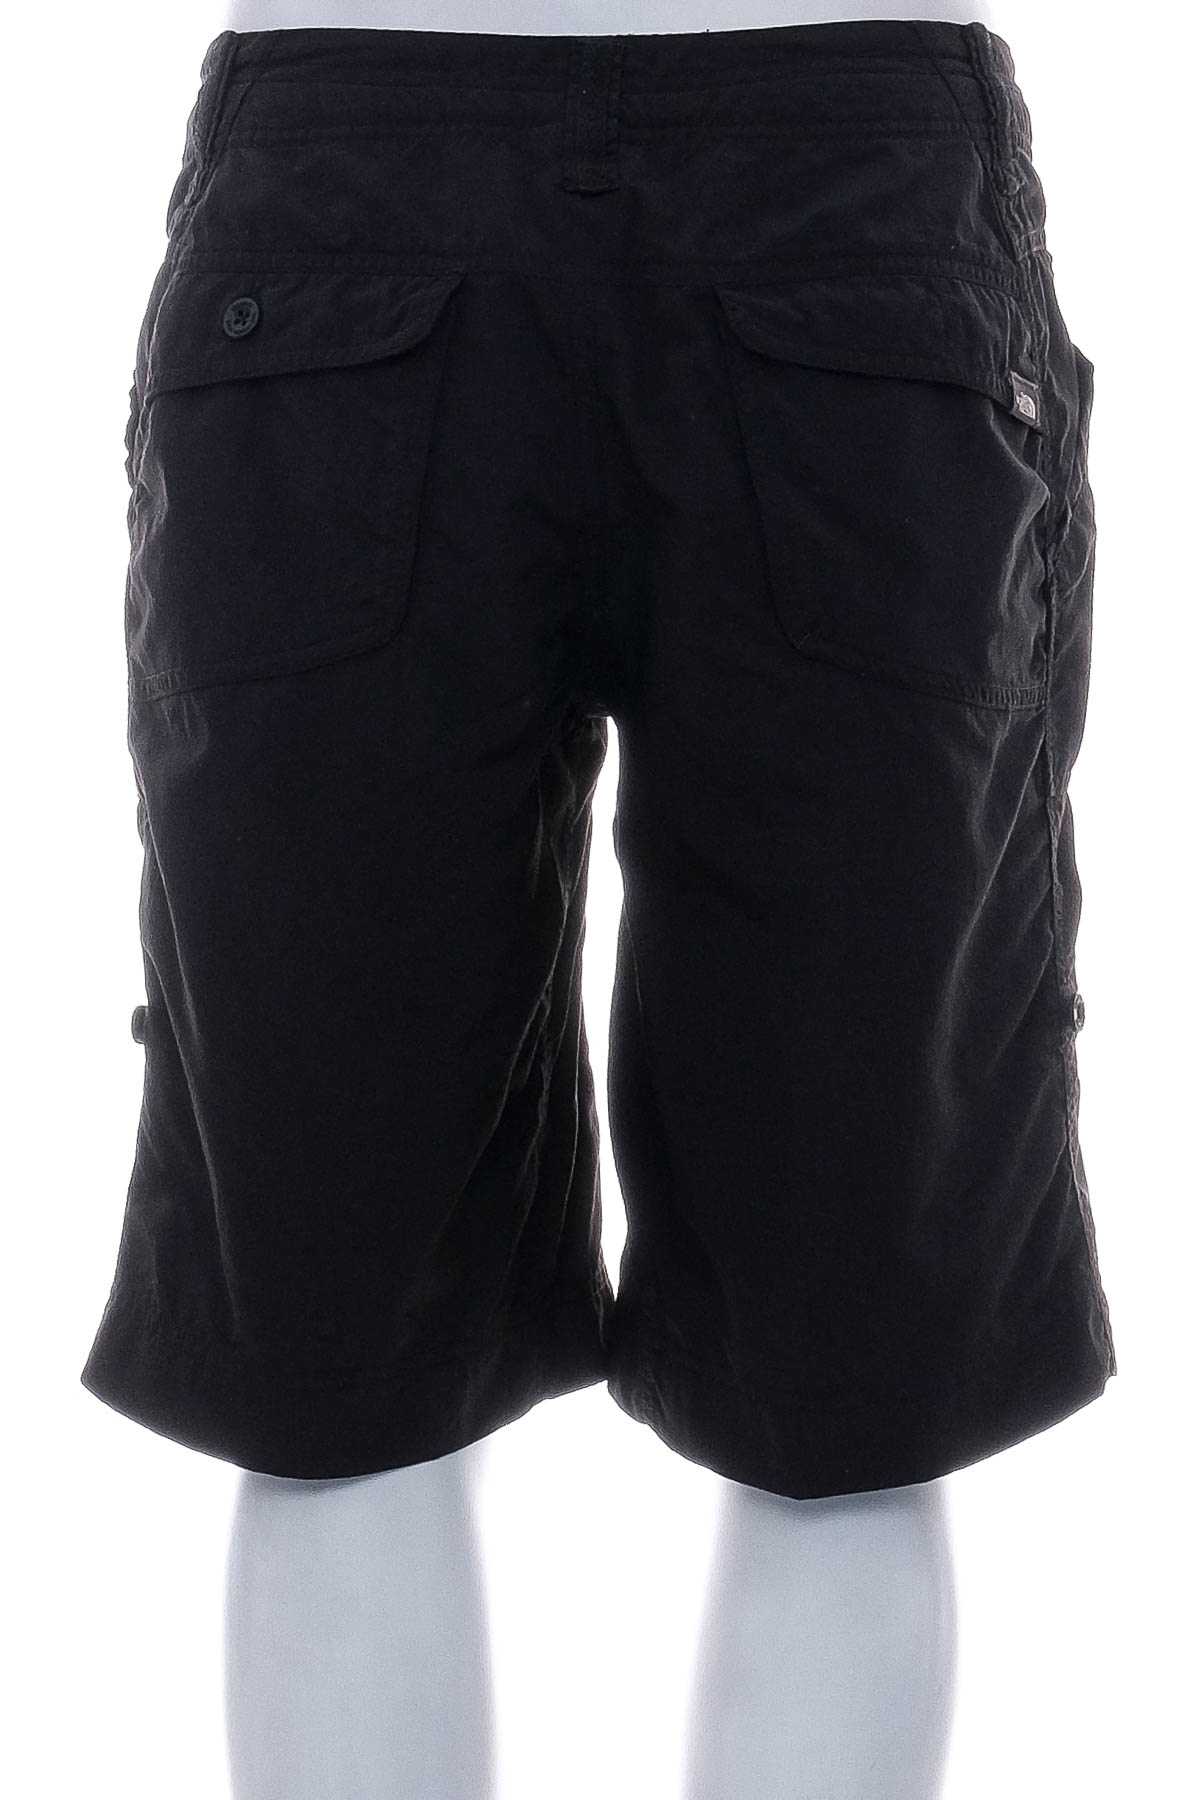 Female shorts - The North Face - 1